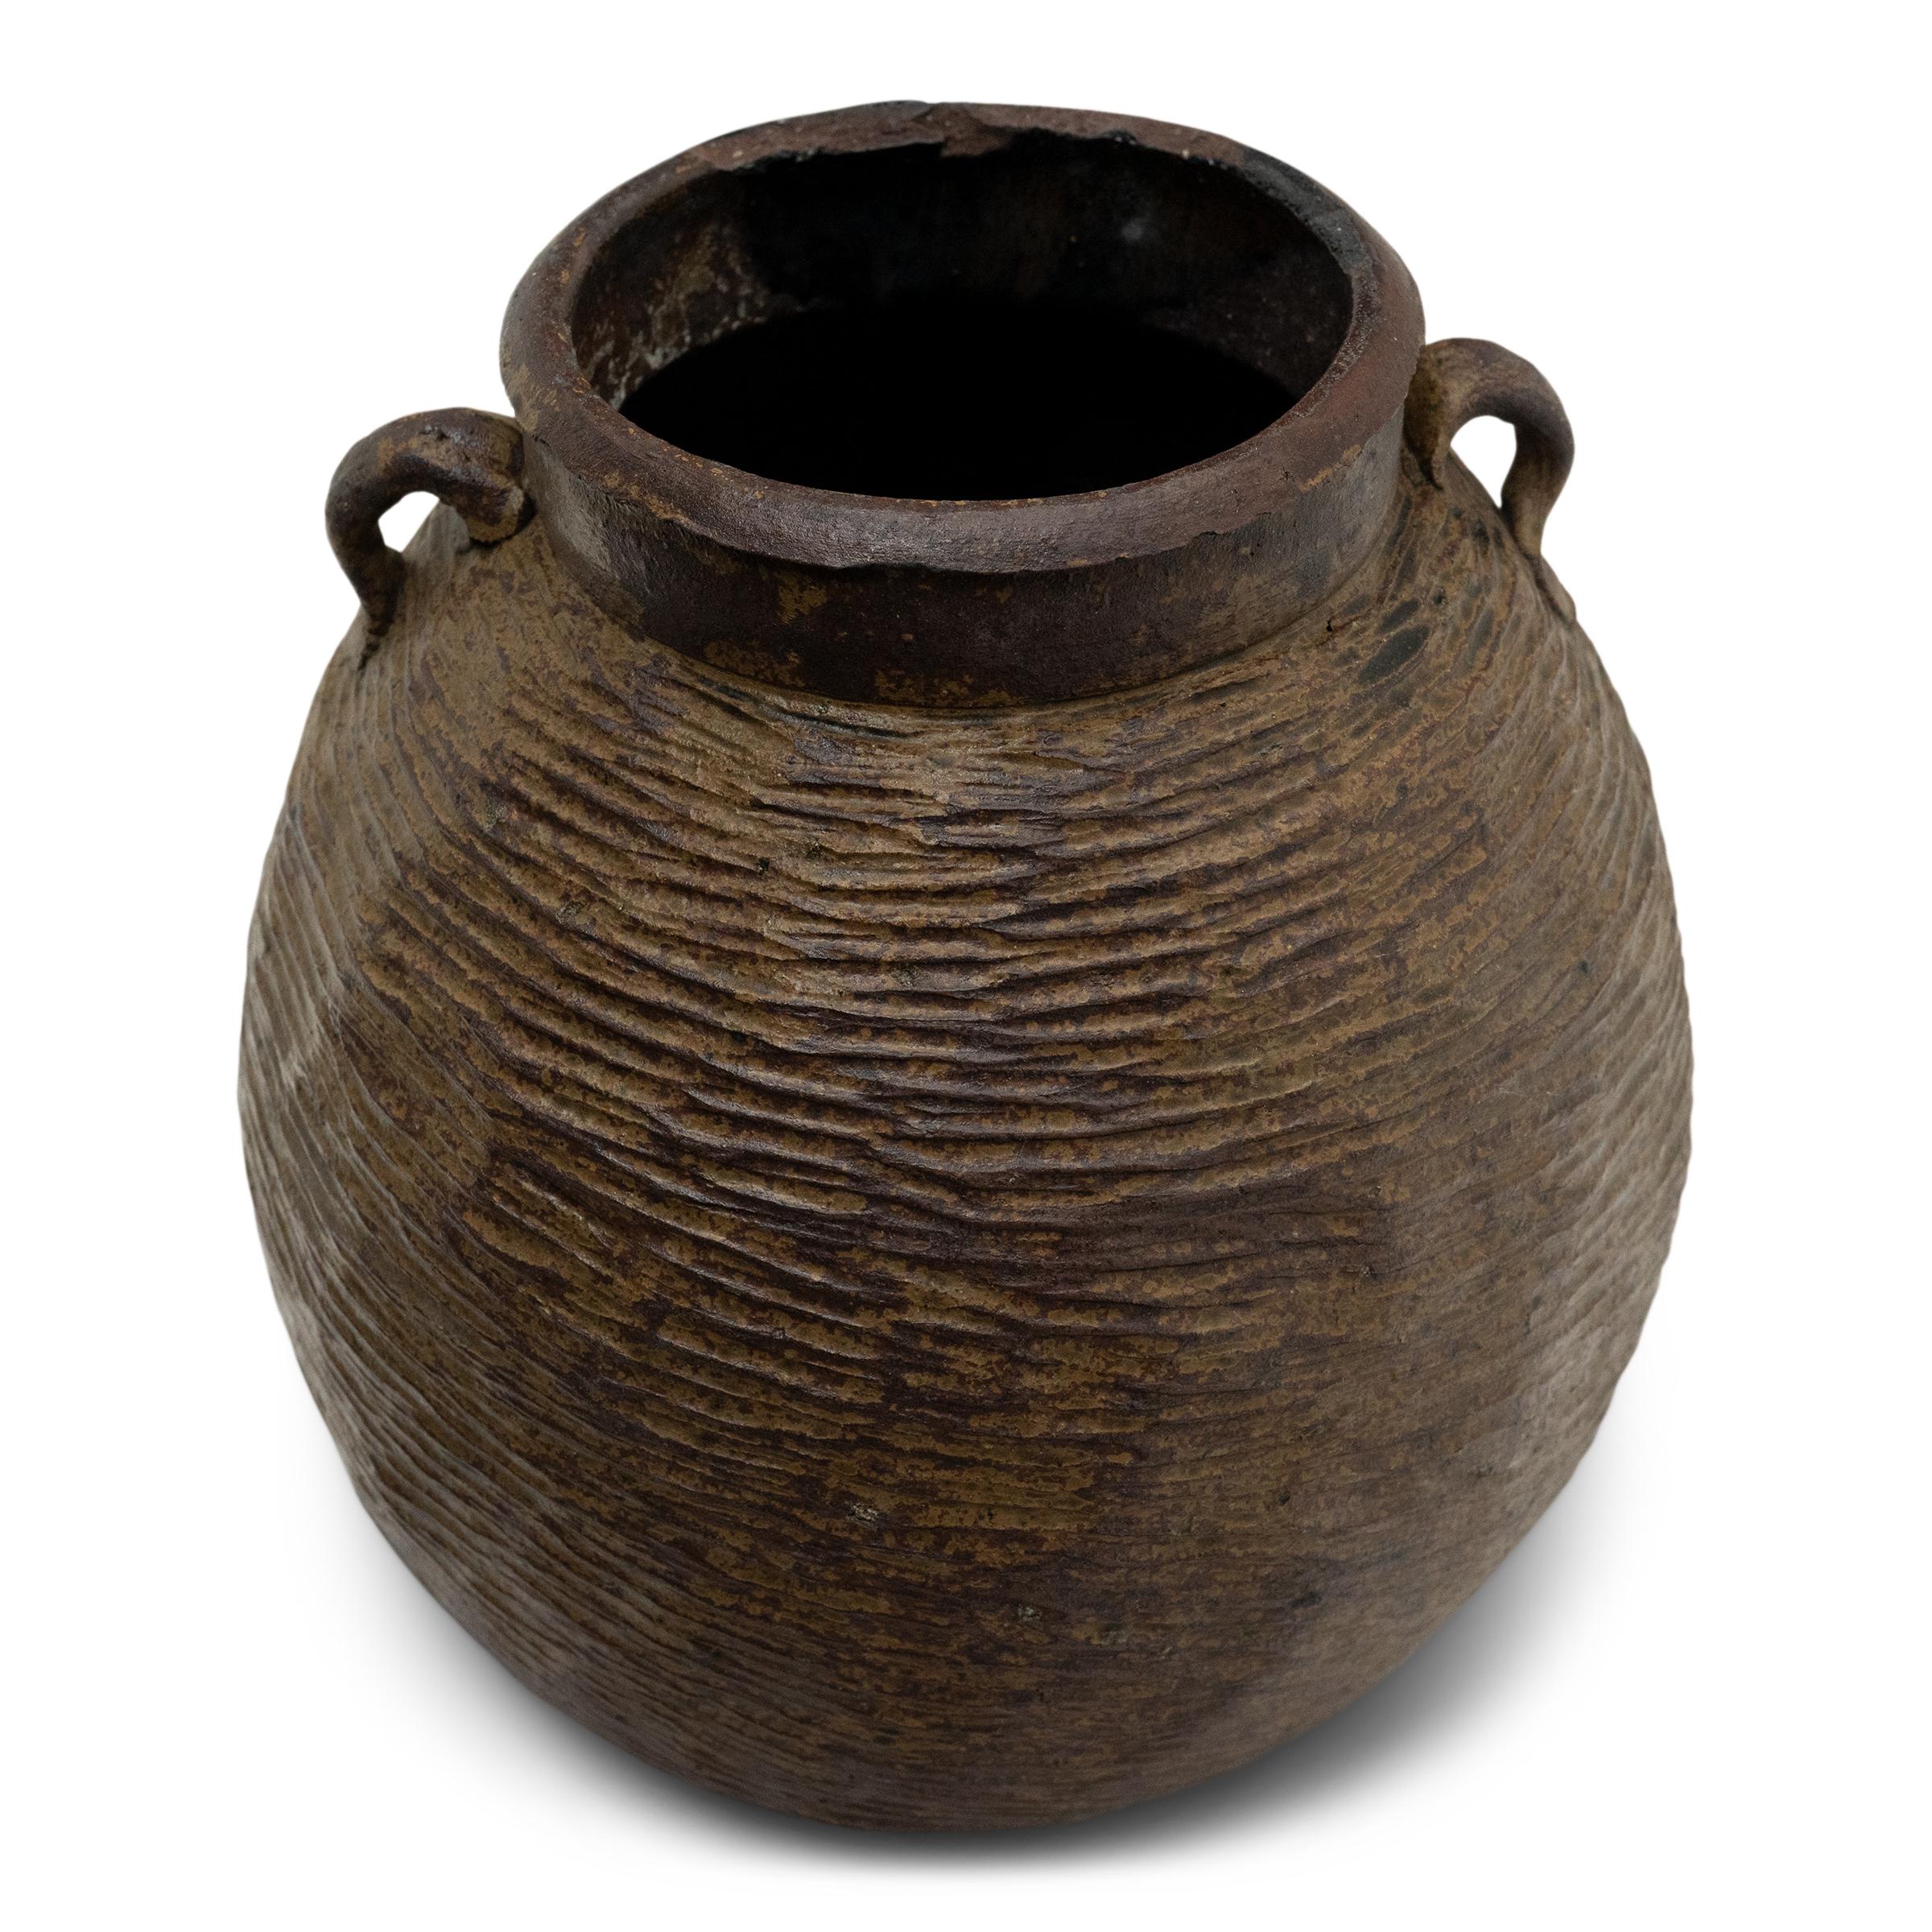 Chinese Yunnan Lobed Pot, c. 1800 In Good Condition For Sale In Chicago, IL